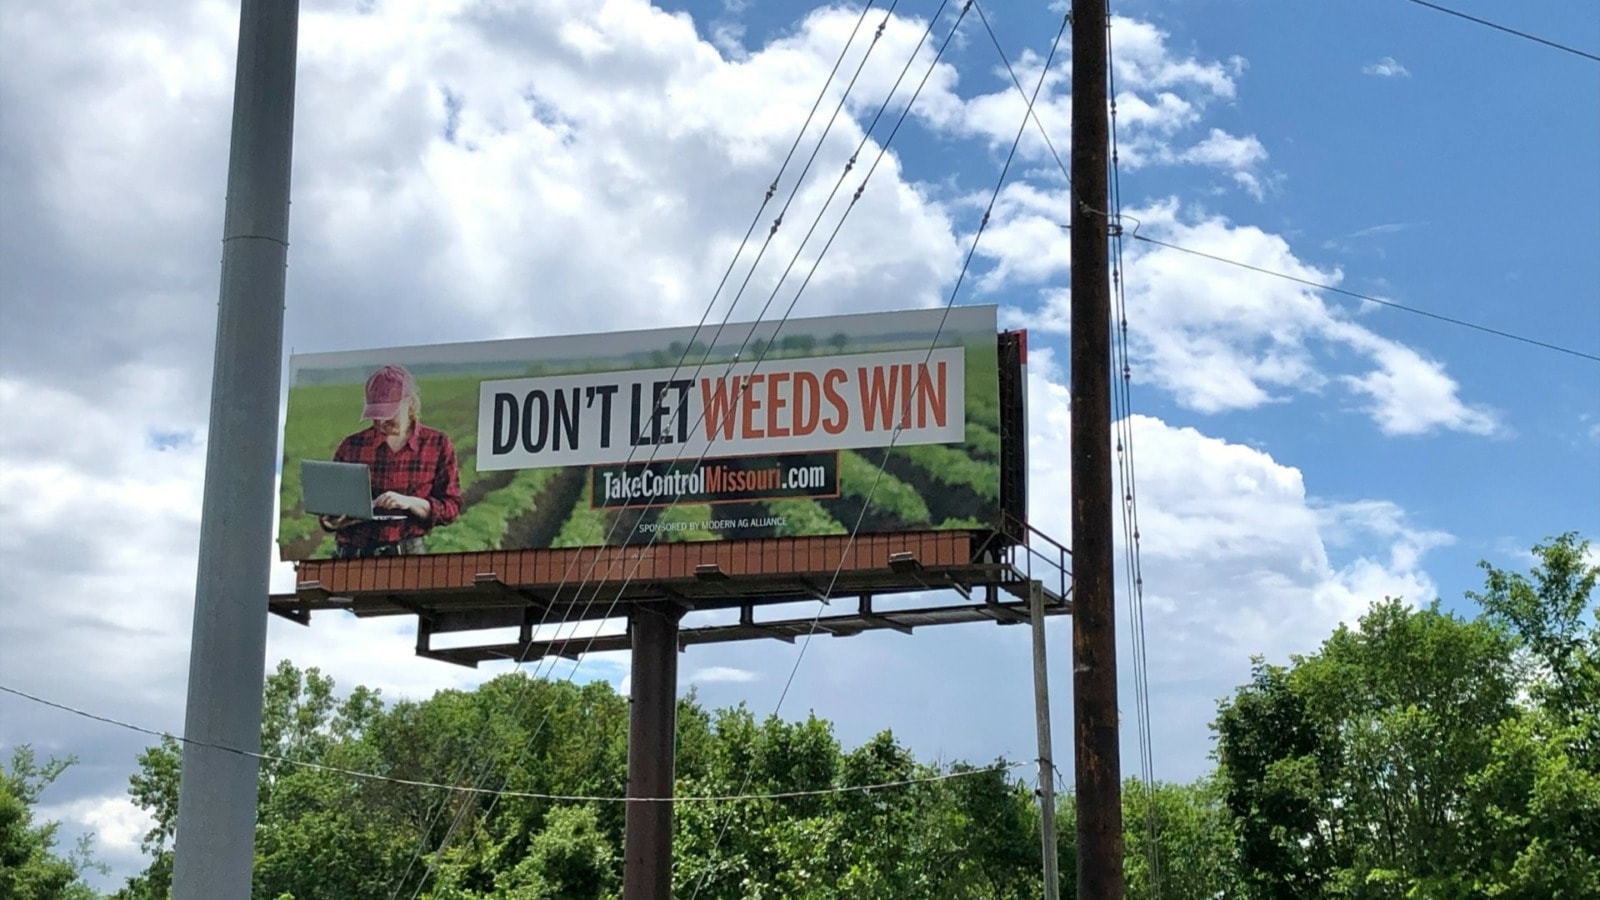 A billboard with a farmer holding a laptop in rows of a crop. Text on the billboard reads "Don't let weeds win" and "takecontrolmissouri.com"